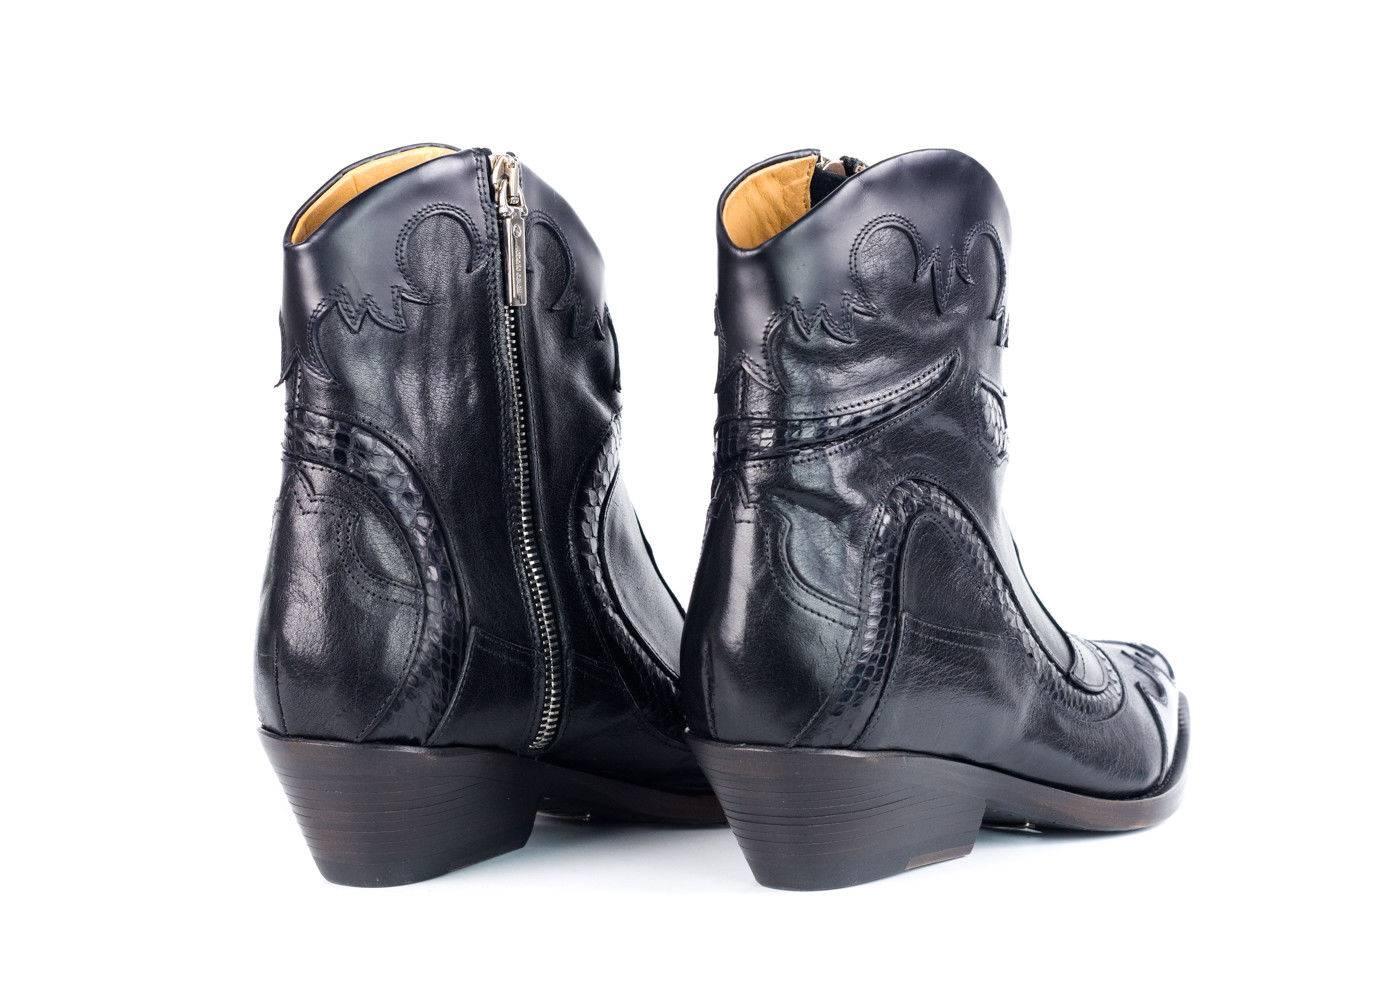 Roberto Cavalli Women's Black Leather Western Ankle Boots In New Condition For Sale In Brooklyn, NY